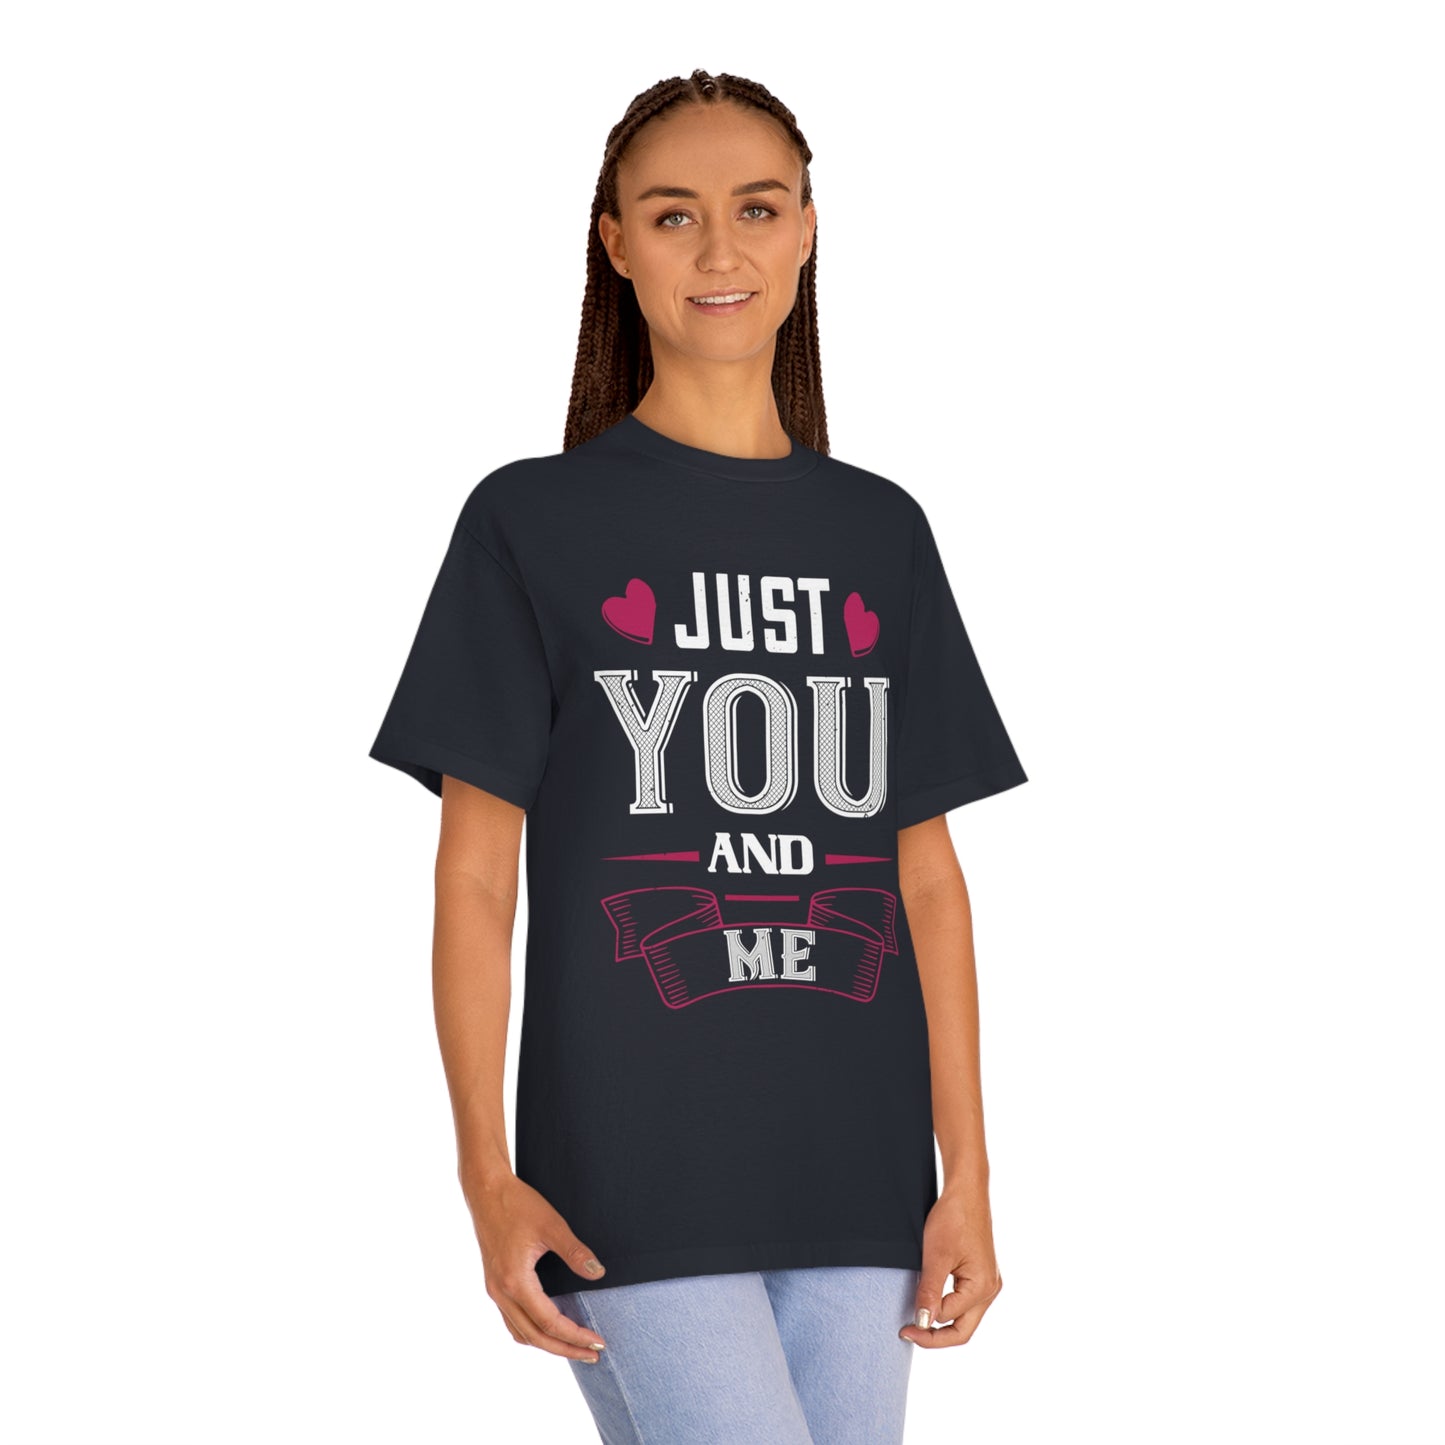 Just you and me Unisex Classic Tee